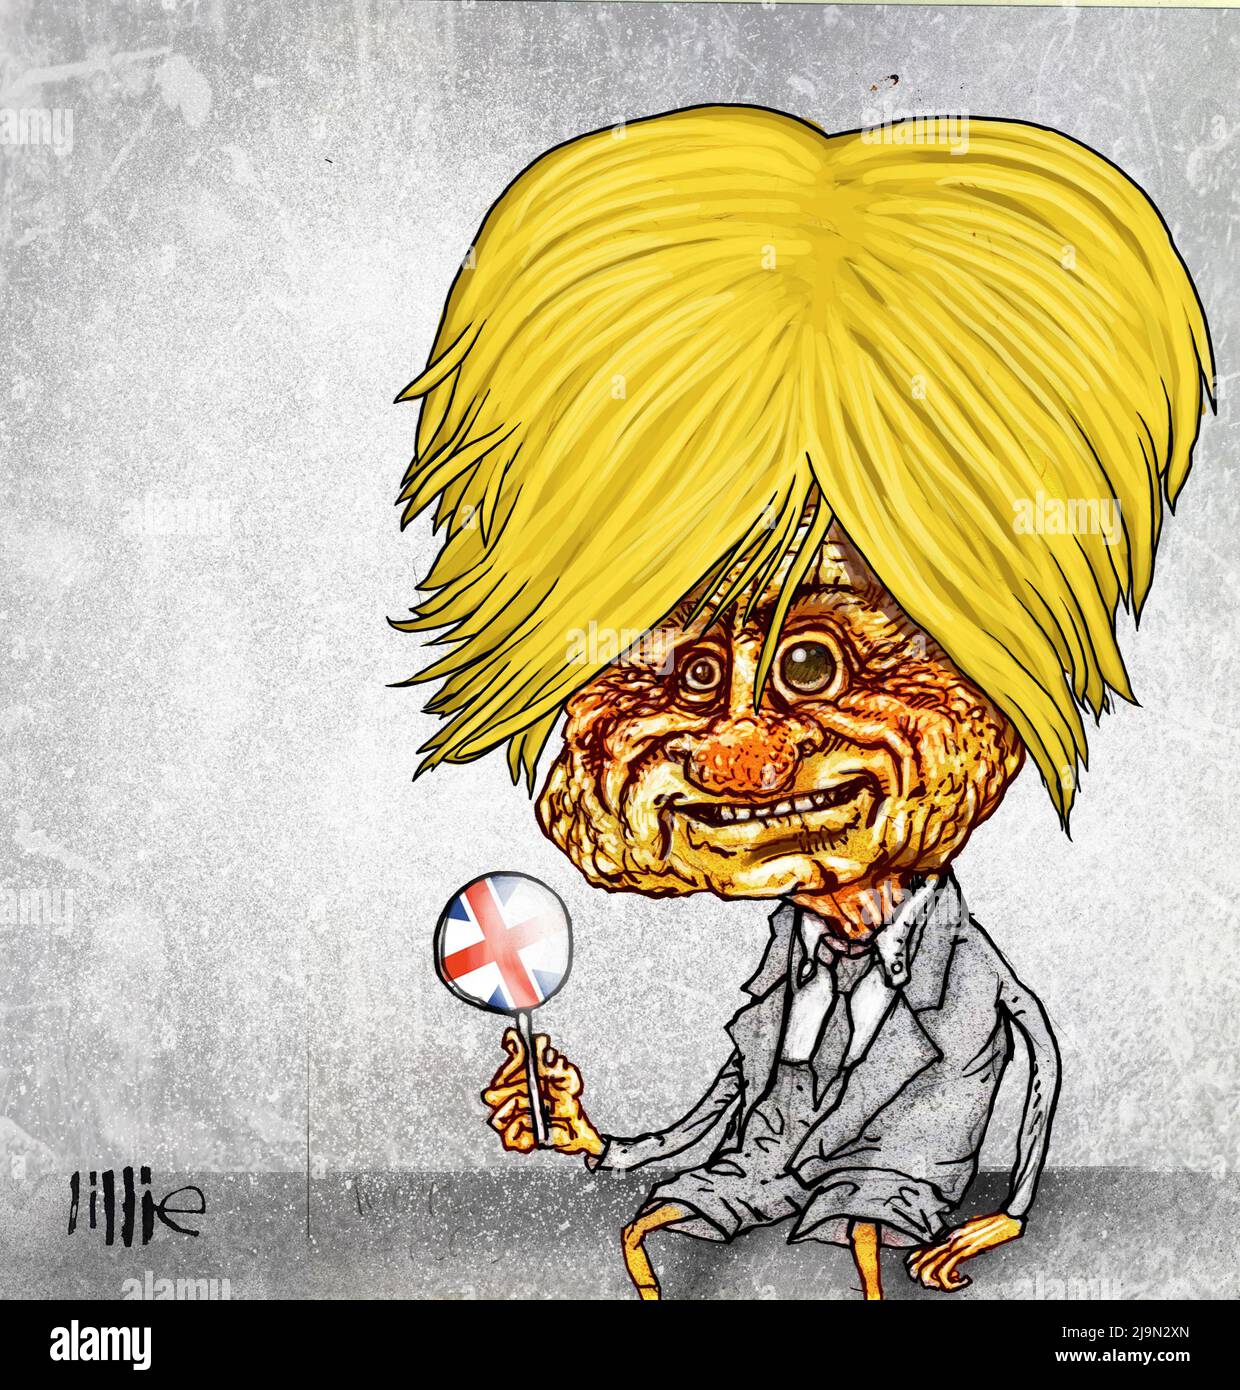 Caricature satire style cartoon, Michael Fabricant Conservative MP for  Lichfield Staffordshire dressed in schoolboy uniform with union flag lollypop. Stock Photo